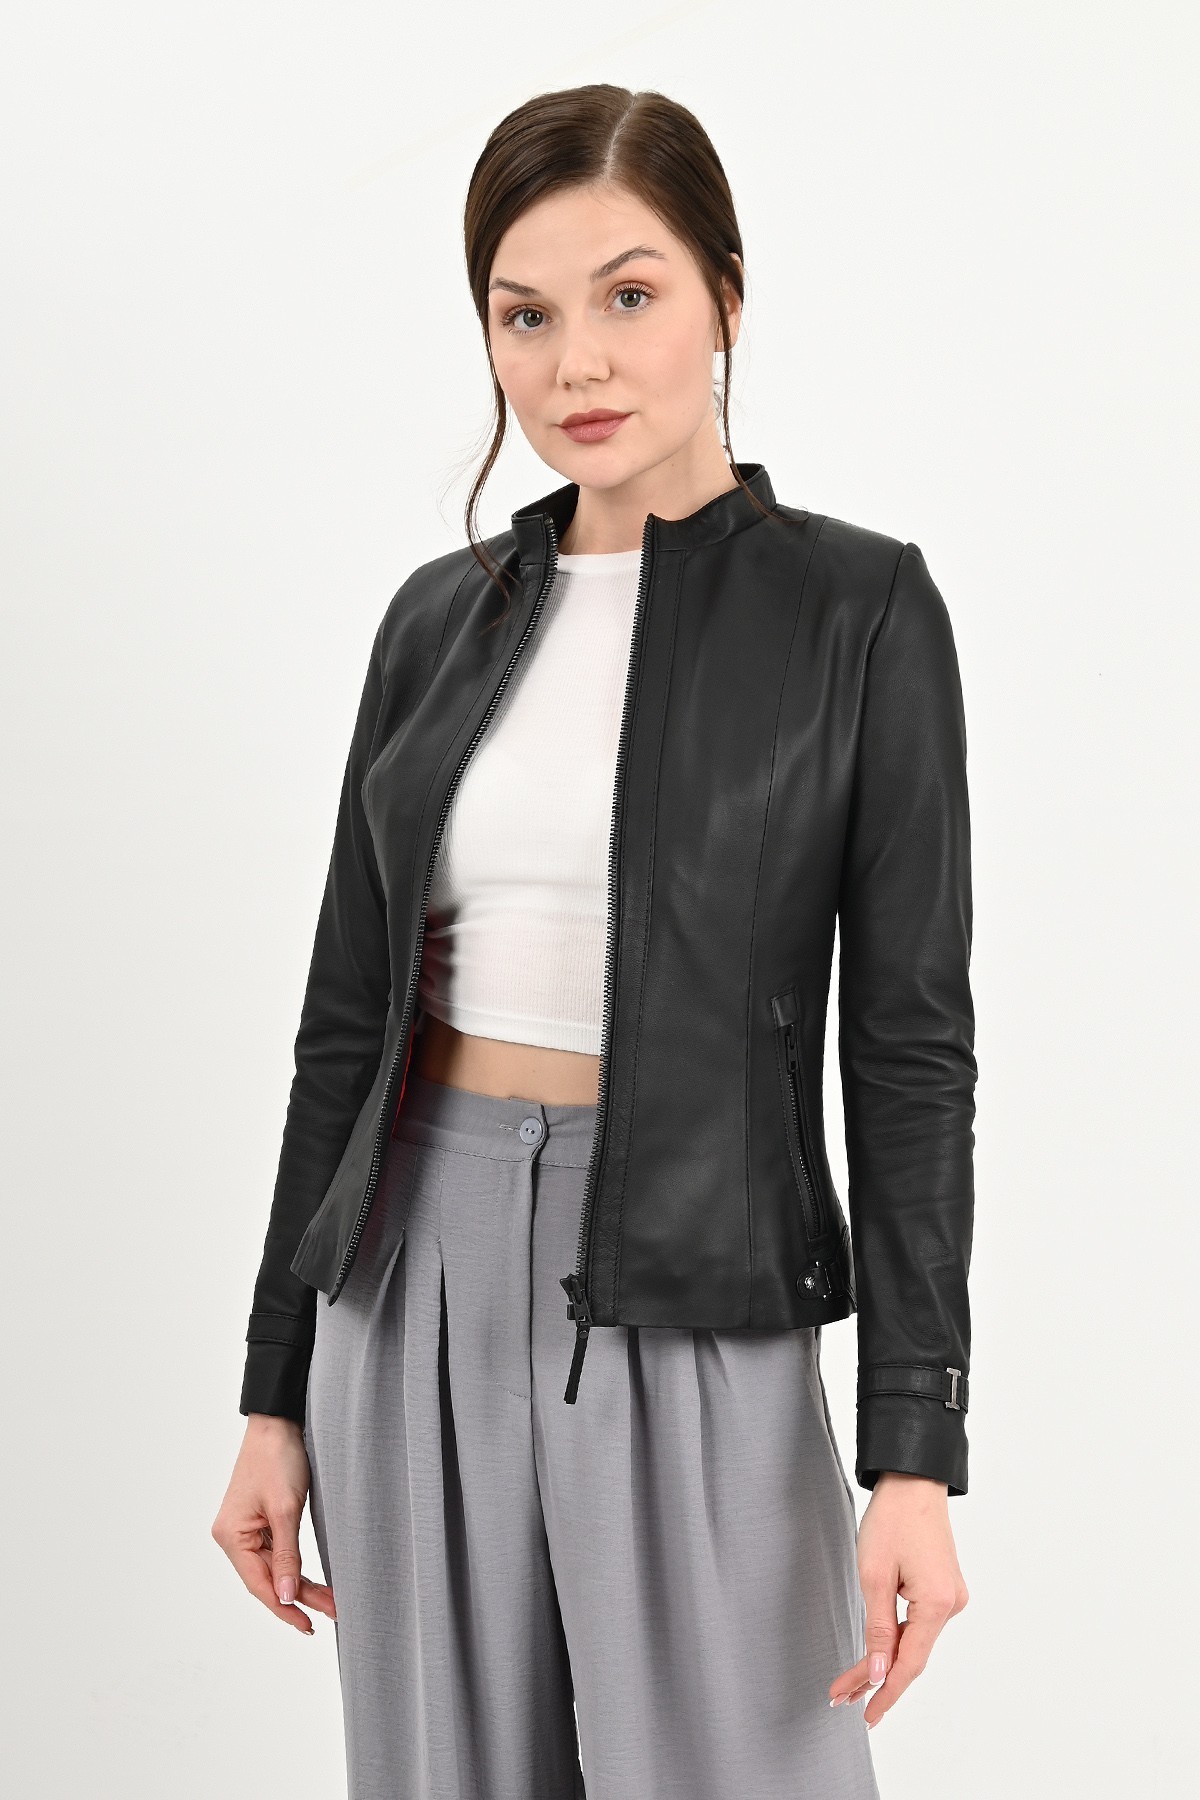 Womens Black Leather Fitted Jacket - Kibyra W4210ABH